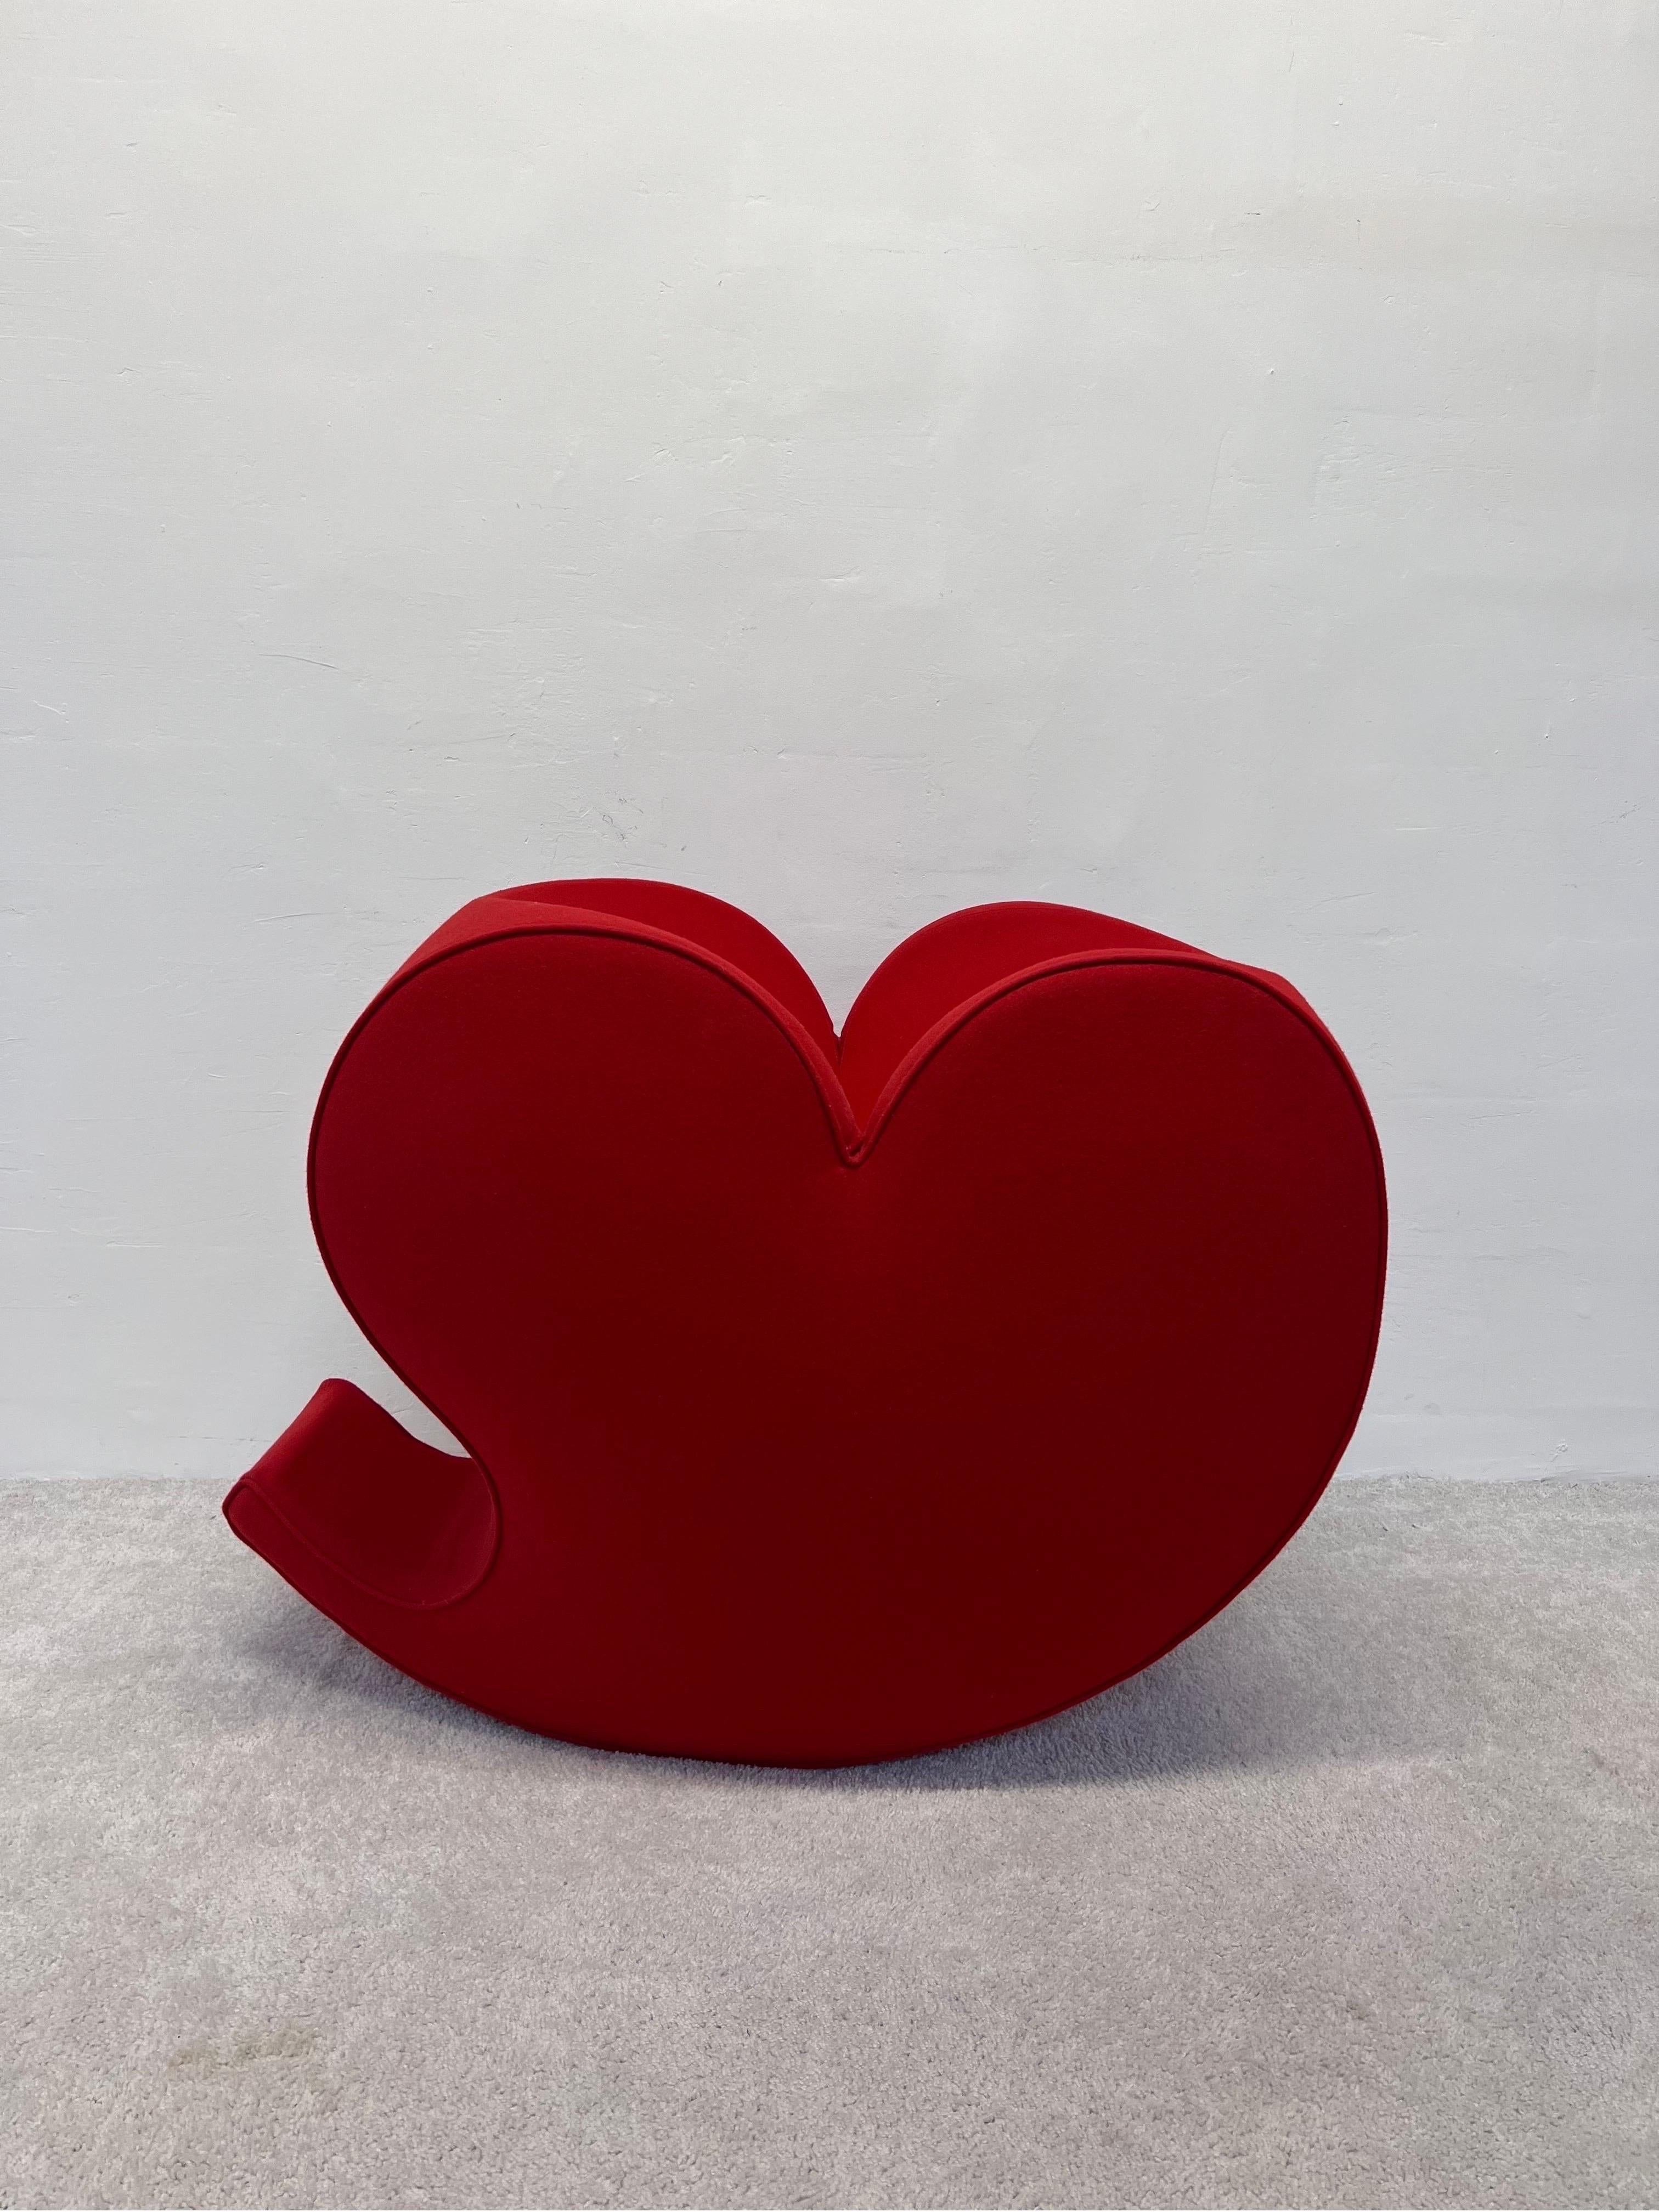 Ron Arad Spring Collection Soft Heart Chair for Moroso In Good Condition For Sale In Miami, FL